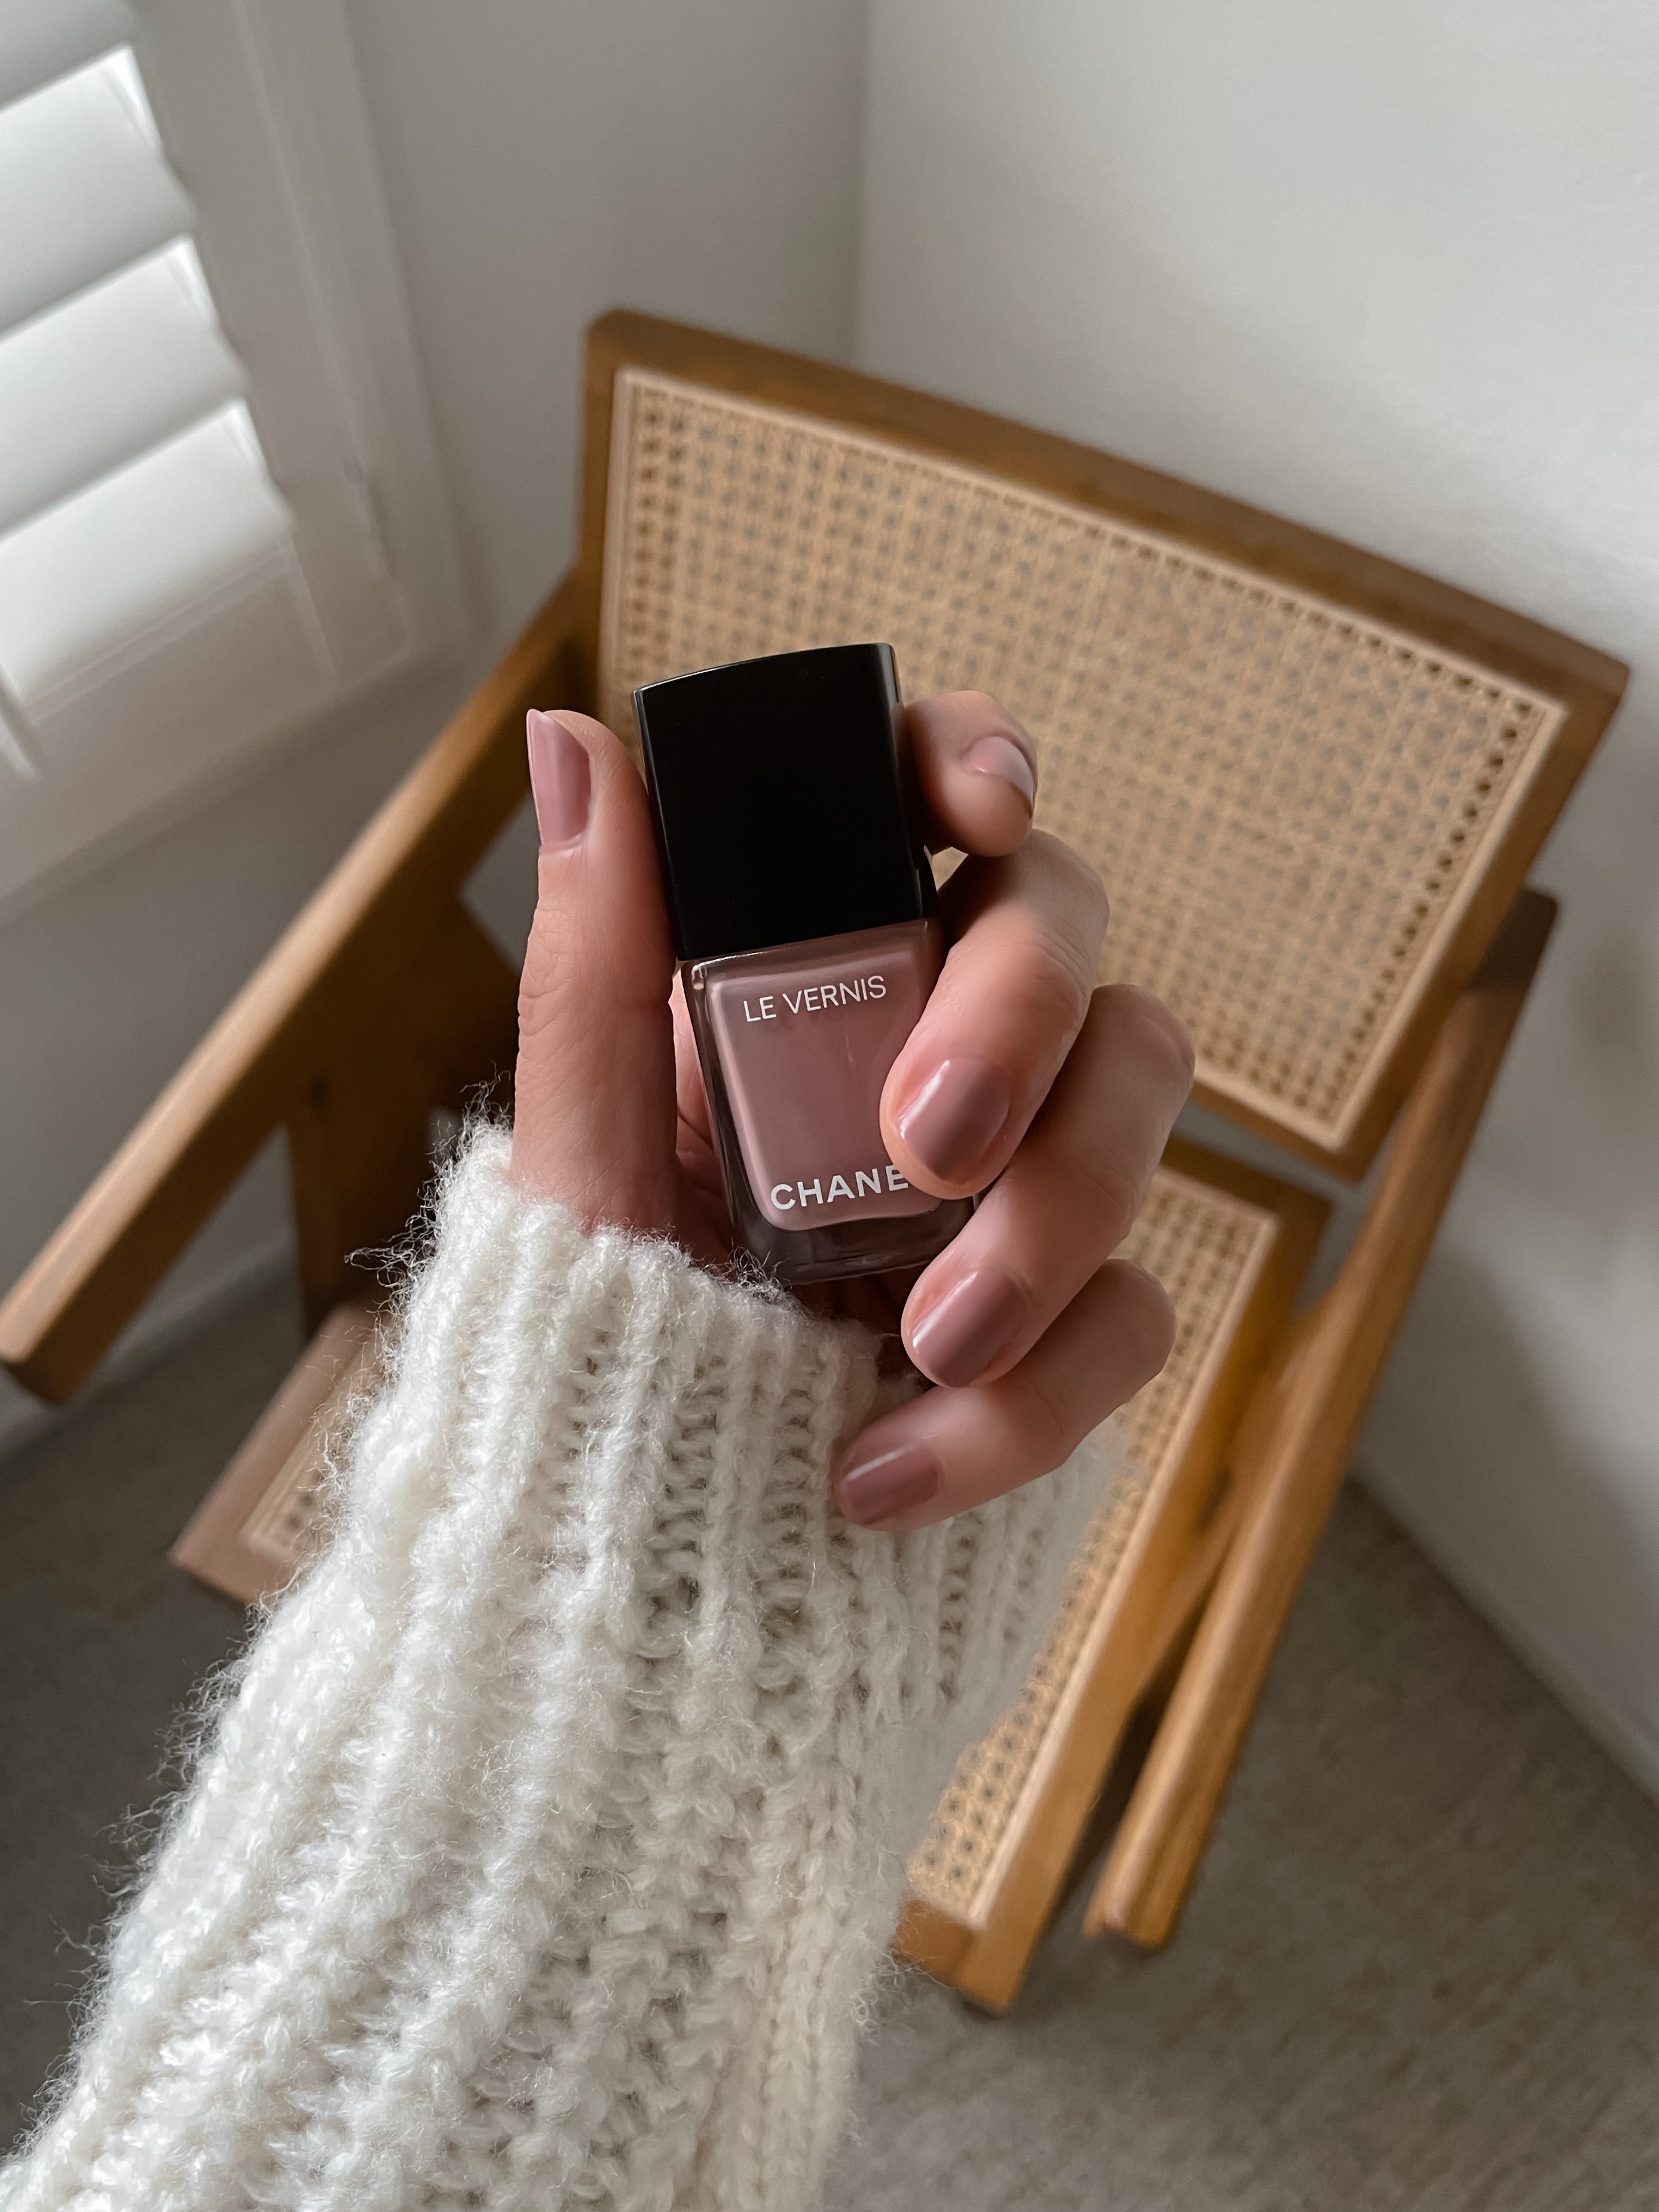 IT IS TRUE. I LIVE WITHOUT THESE 5 CHANEL NAIL COLORS – The Edition